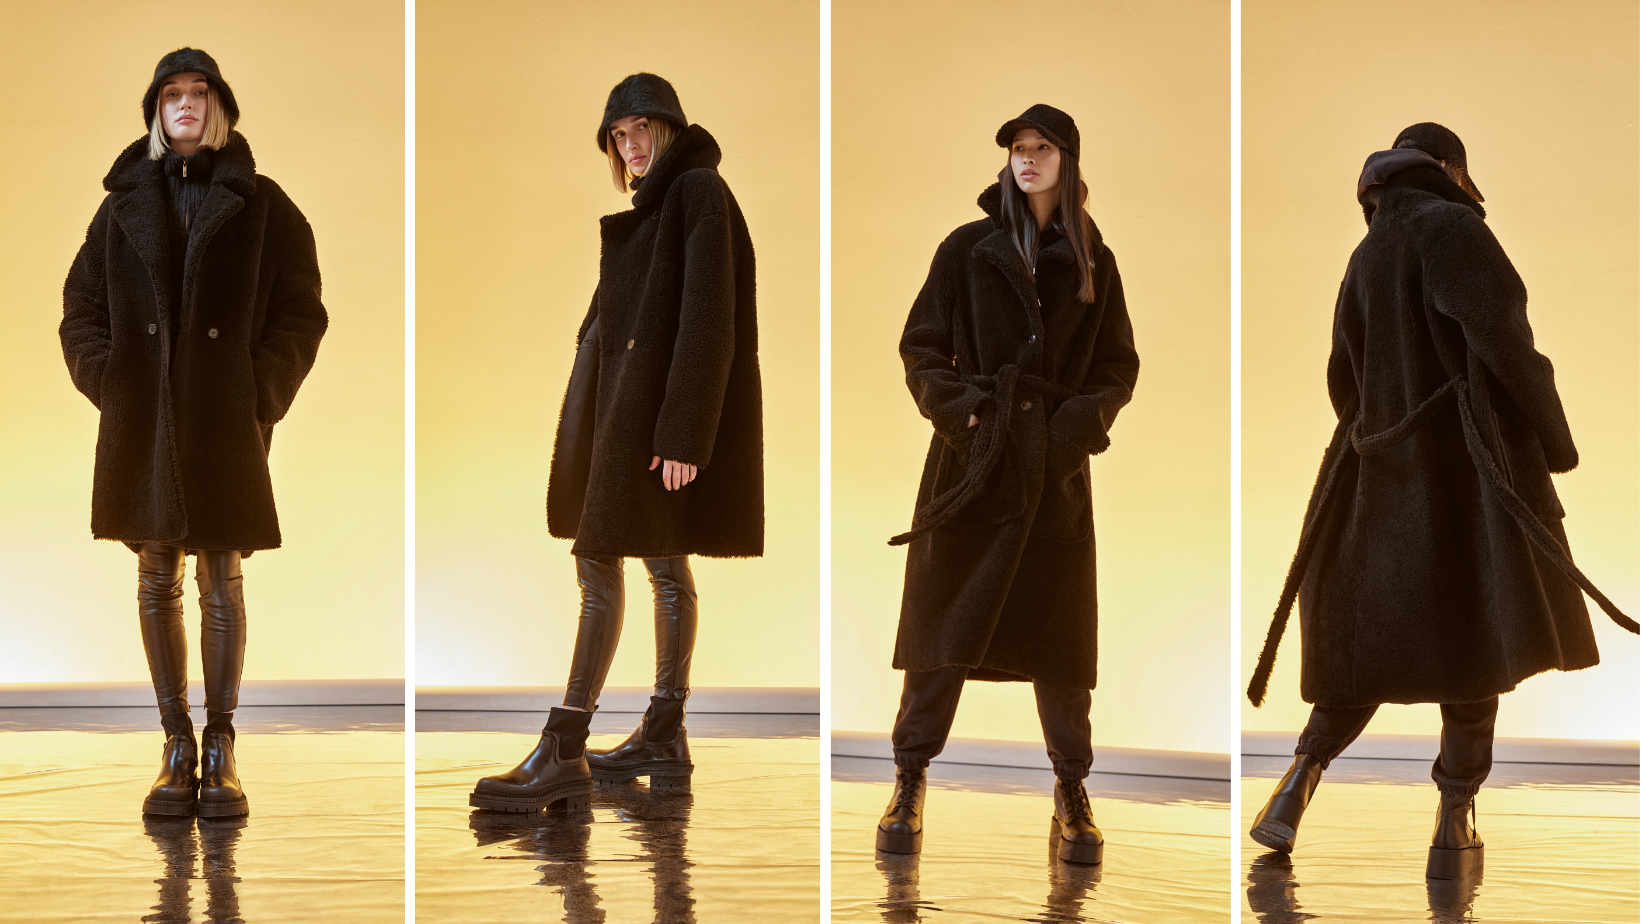 From left to right; Gyro: Relaxed medium length nappa moto Removable button hood Curly wool collar and trims Drop shoulder Asymmetrical zip closure Interior zip pockets. Freed: This notched collar coat is a fashionable layer for those cold days. Crafted from Spanish shearling this coat dresses you for days or evenings elegantly sheltering you from the cold with head-to-toe protection.